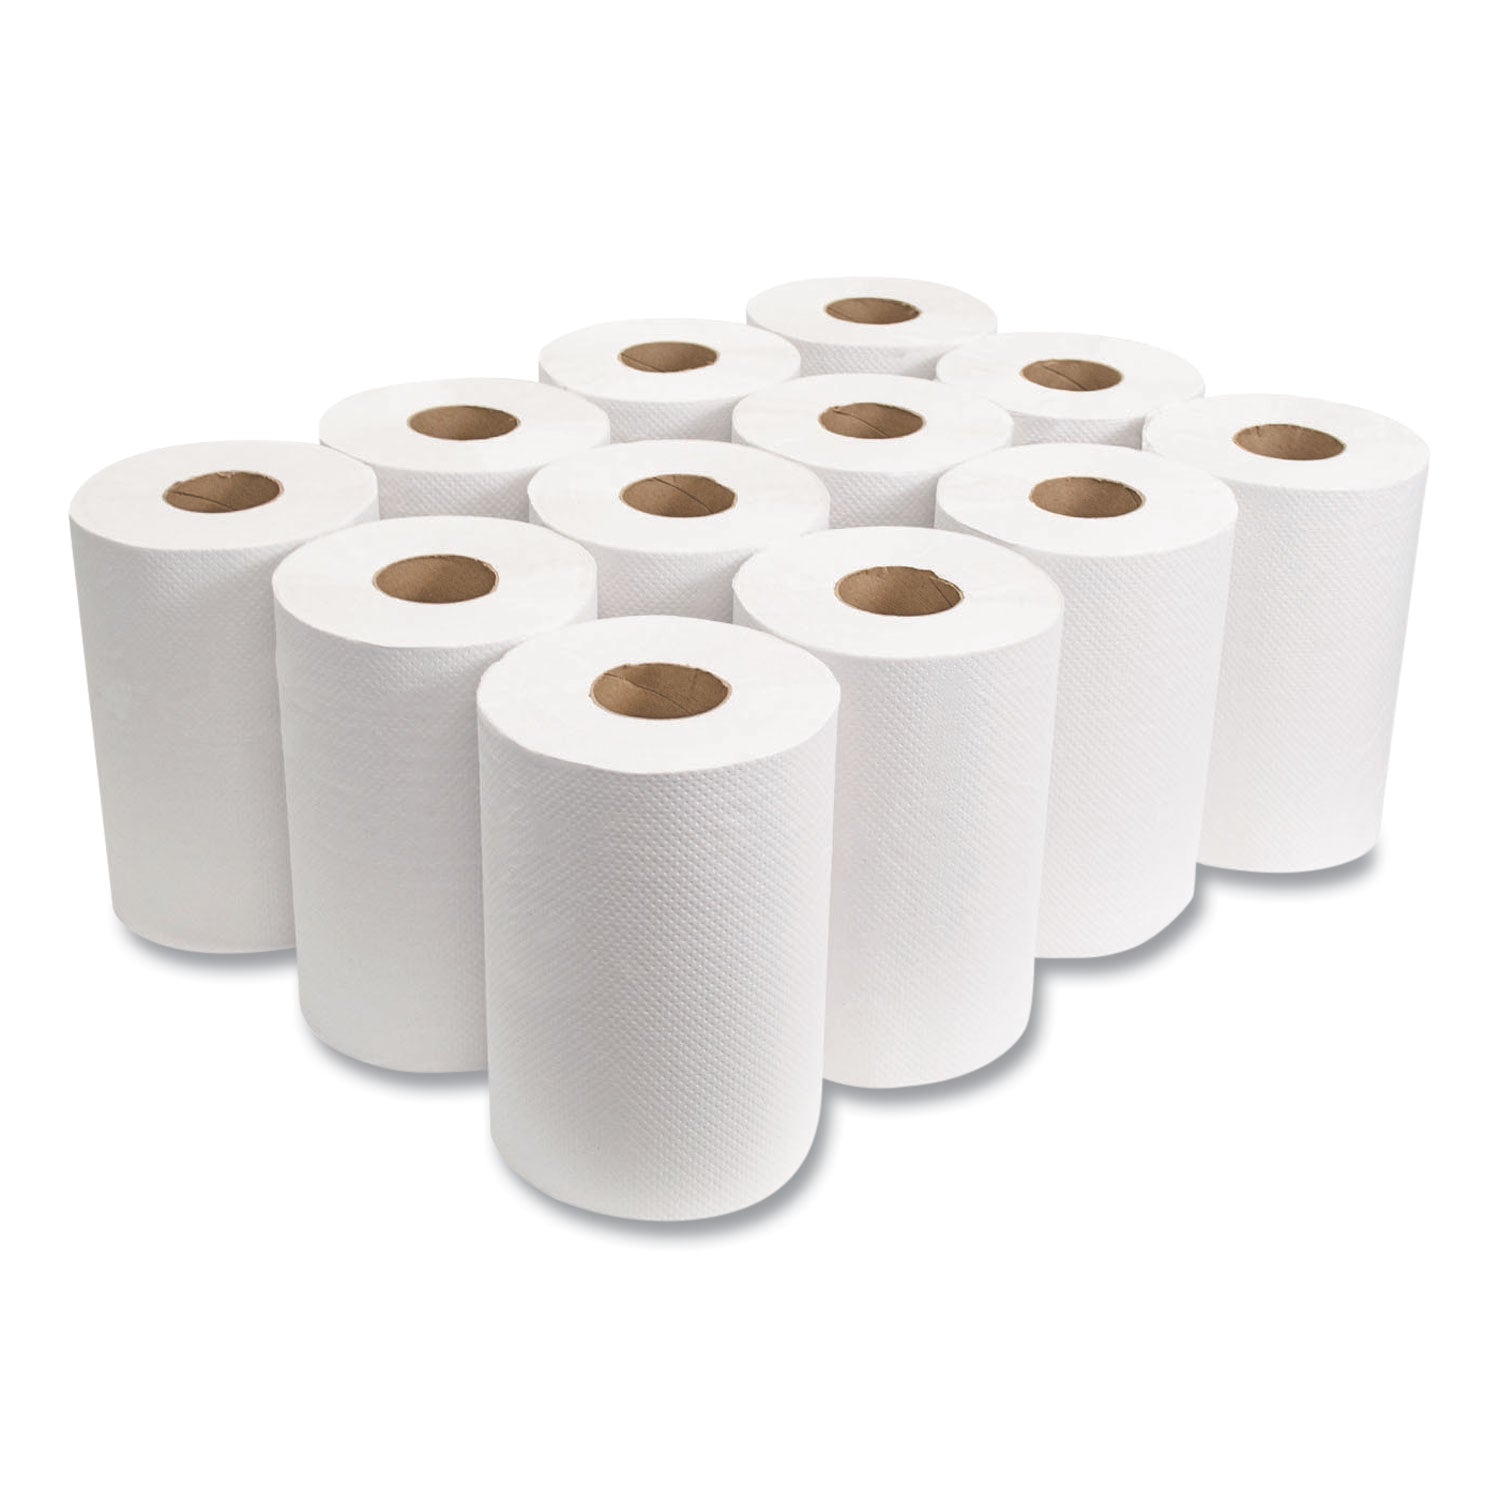 Morsoft Universal Roll Towels, 1-Ply, 8" x 350 ft, White, 12 Rolls/Carton - 